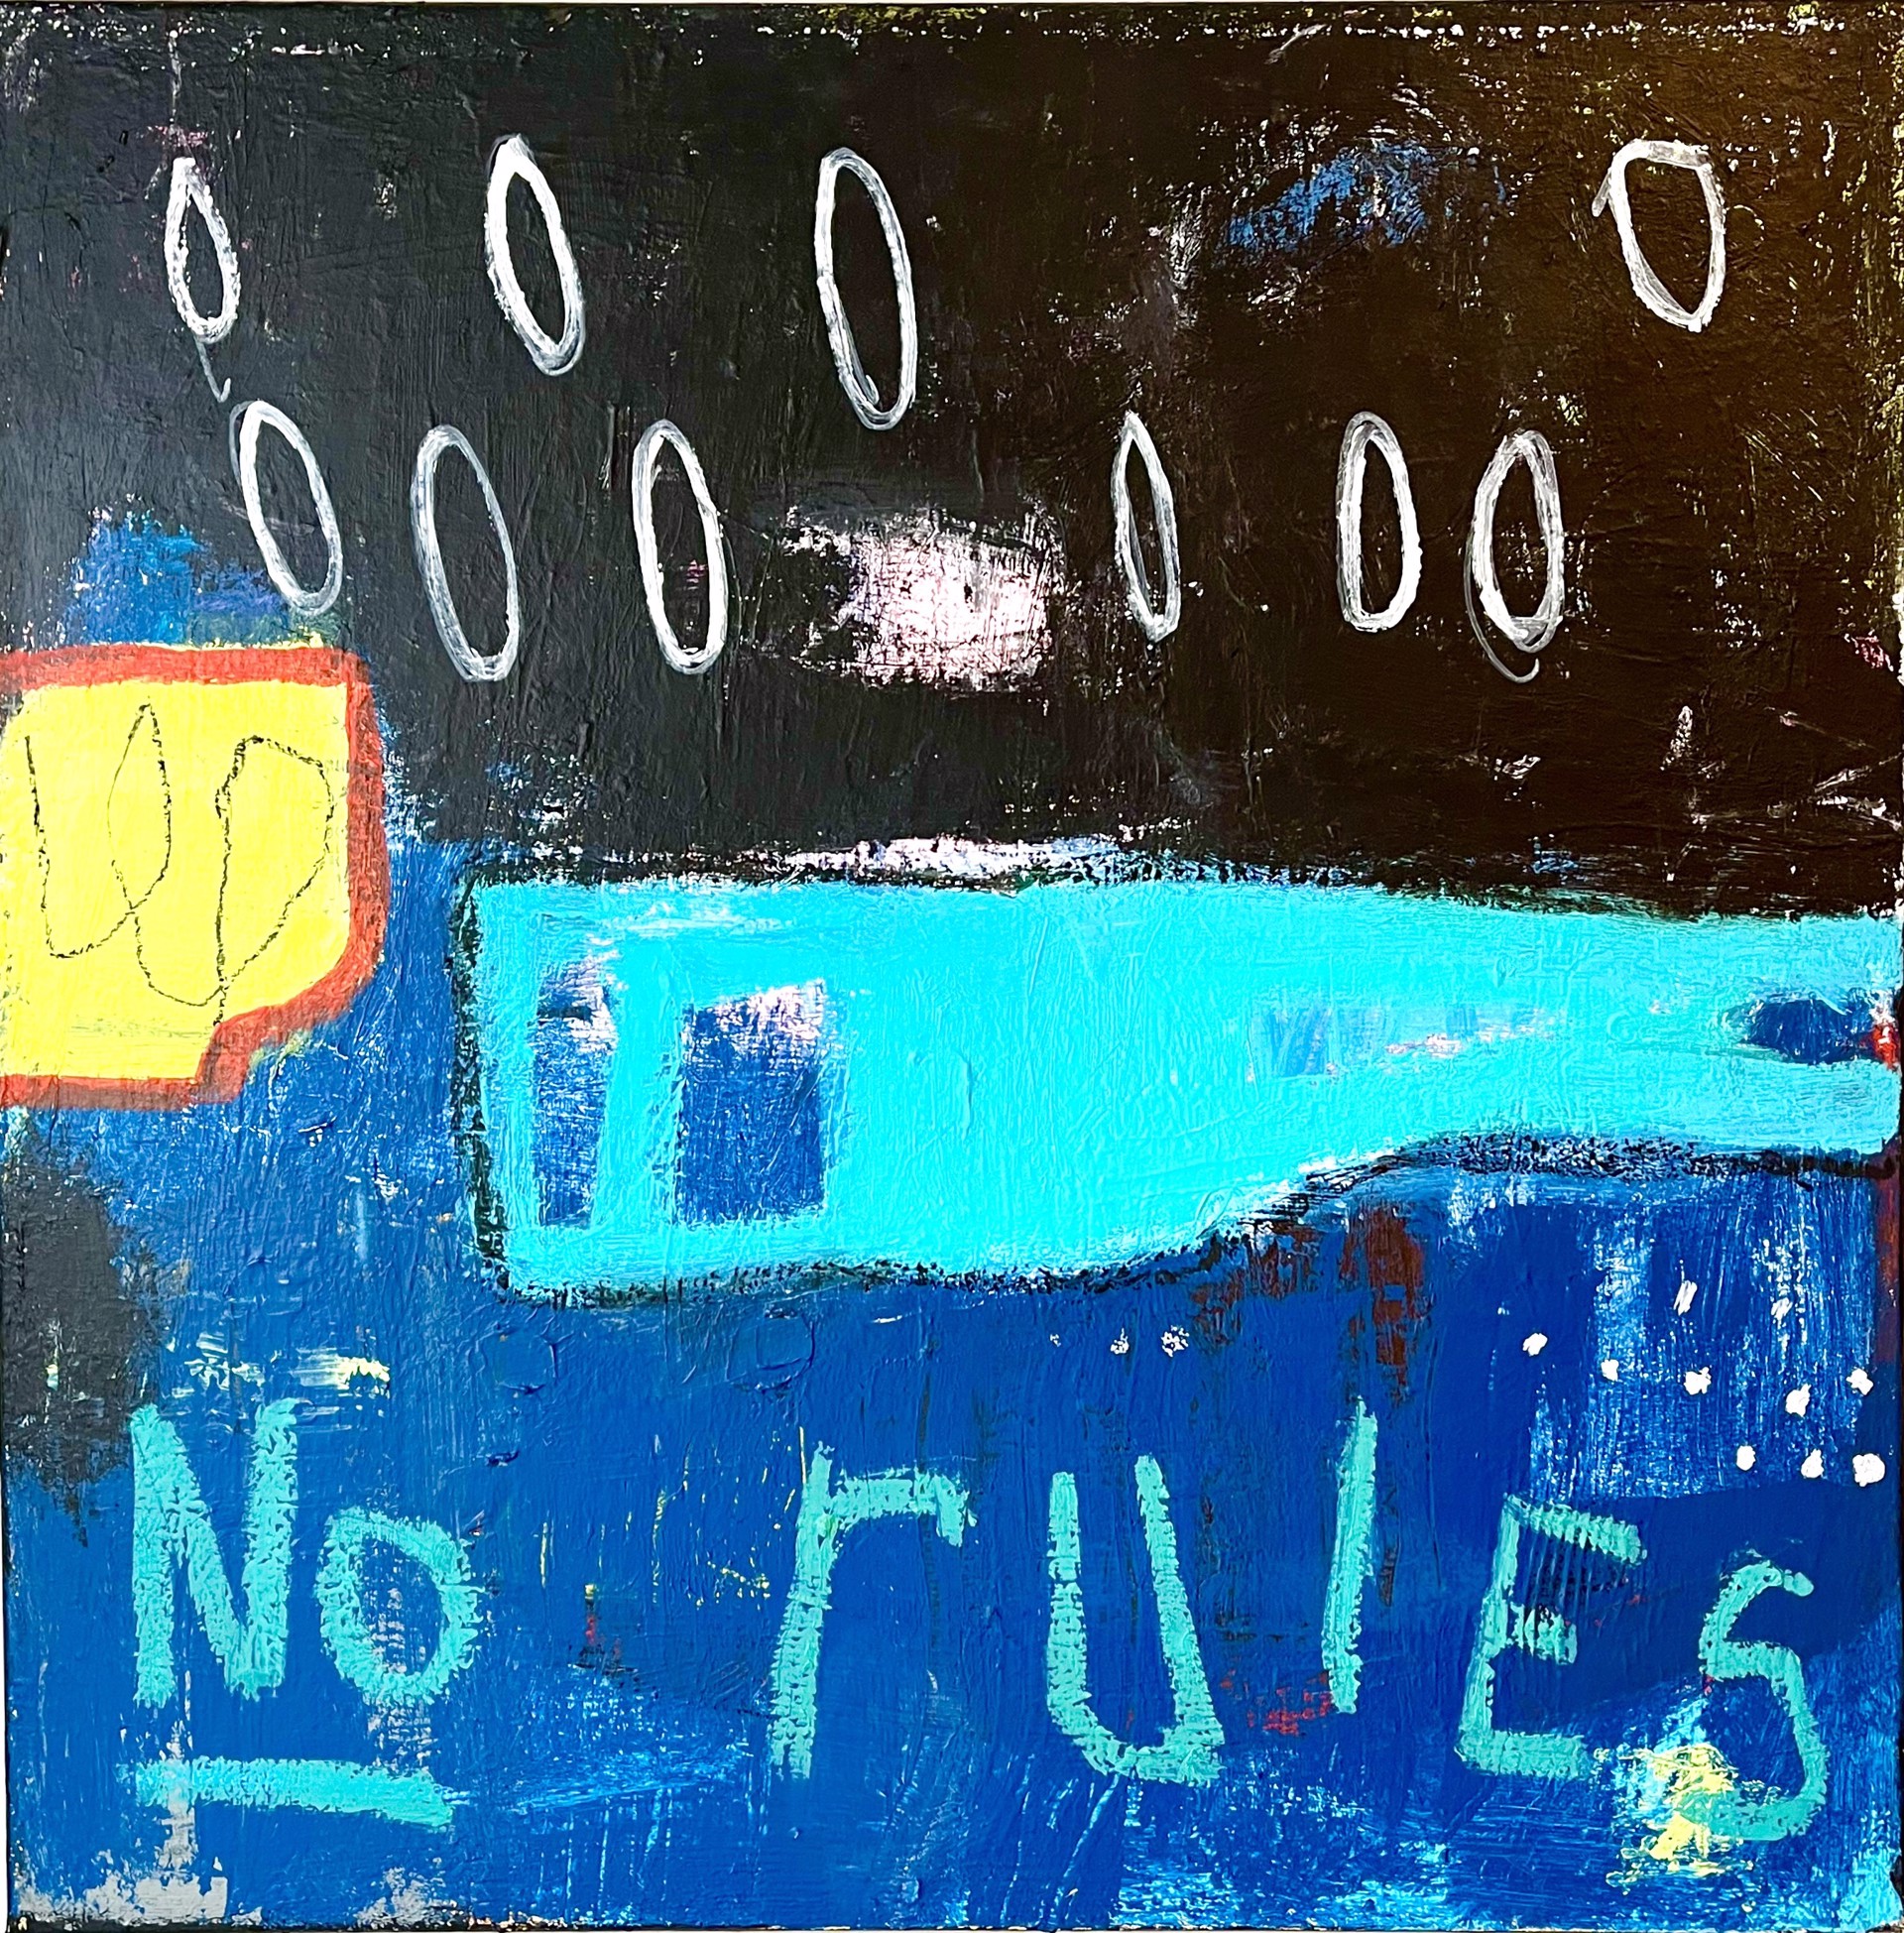 No Rules by Kim Goldstein